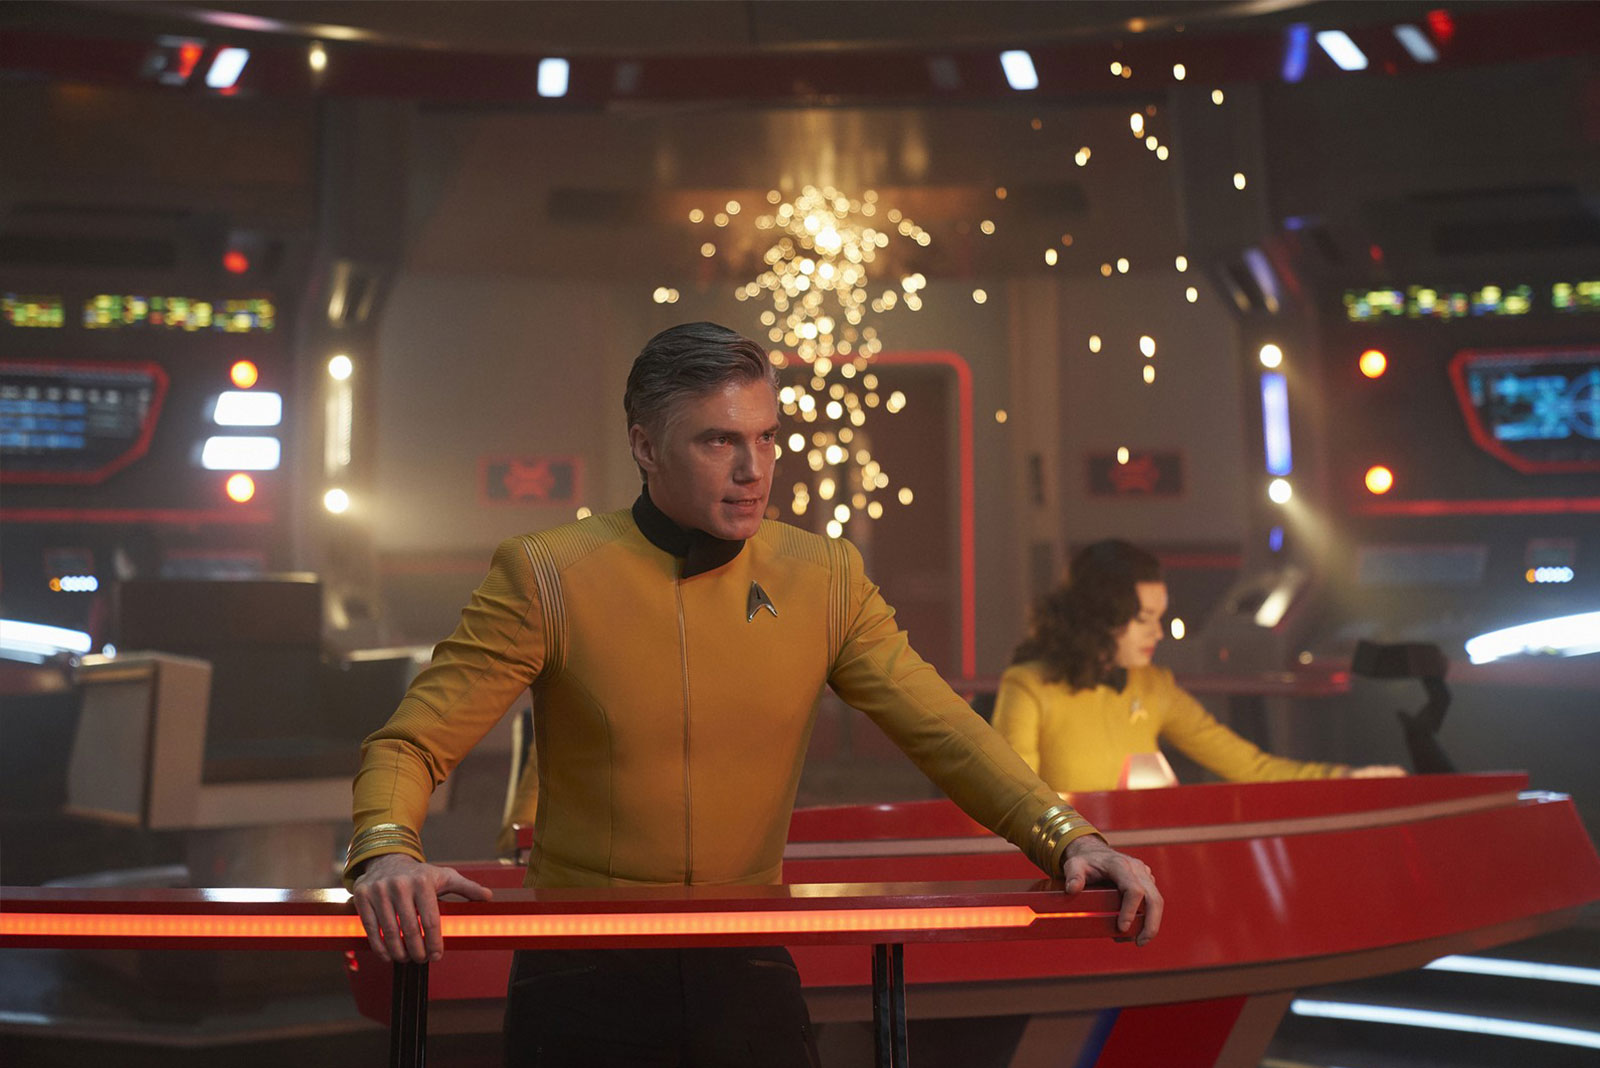 Anson Mount as Captain Christopher Pike